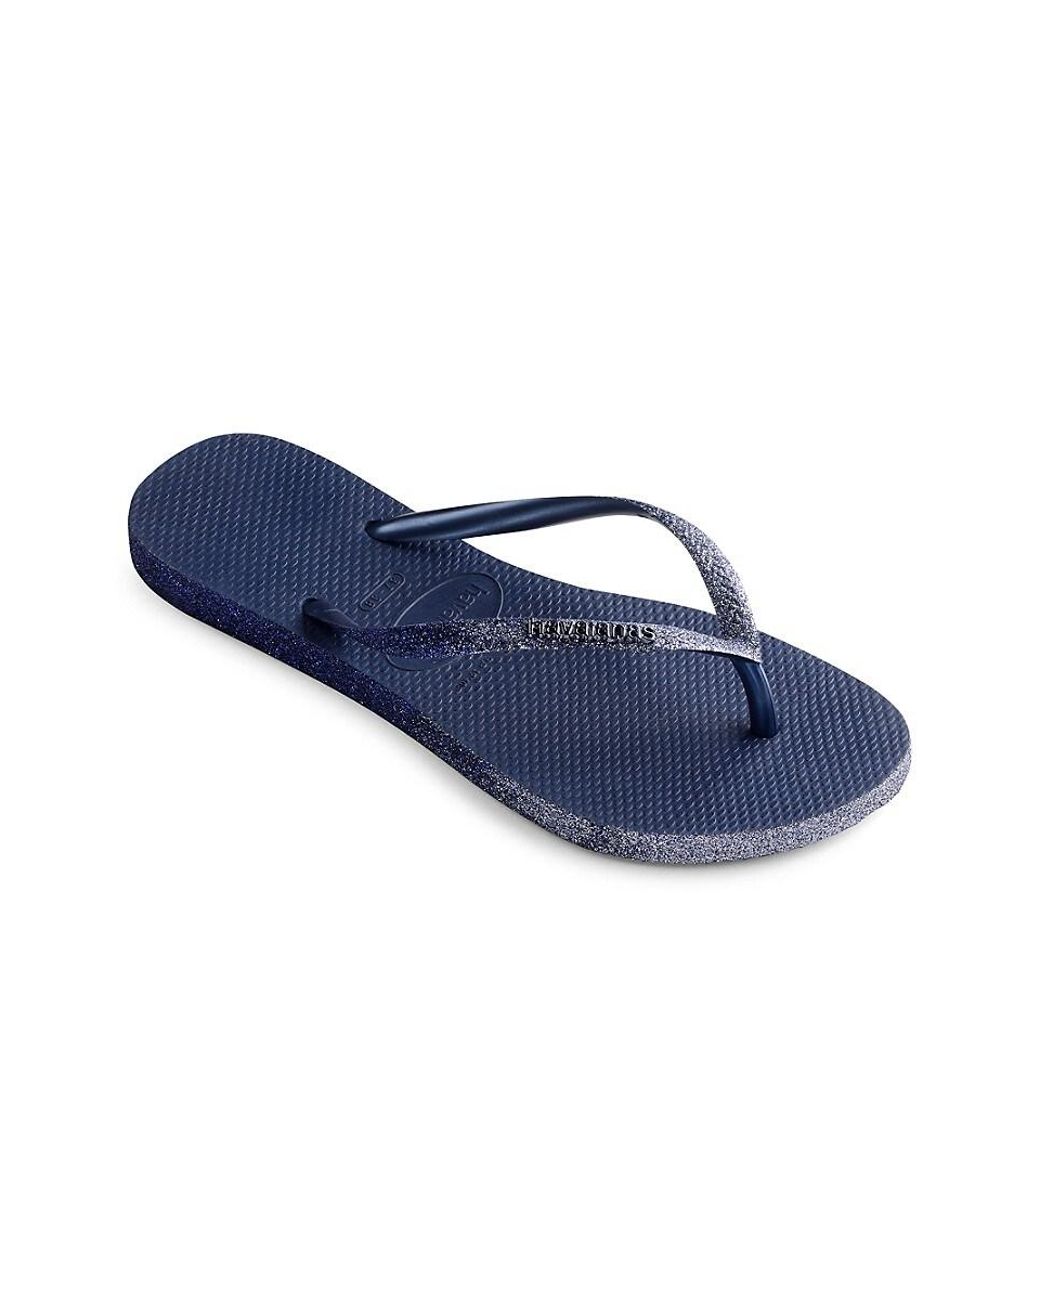 Havaianas Rubber Slim Sparkle Ii Flat Flip Flop 8 Navy Blue Womens Shoes Flats and flat shoes Sandals and flip-flops Save 29% 